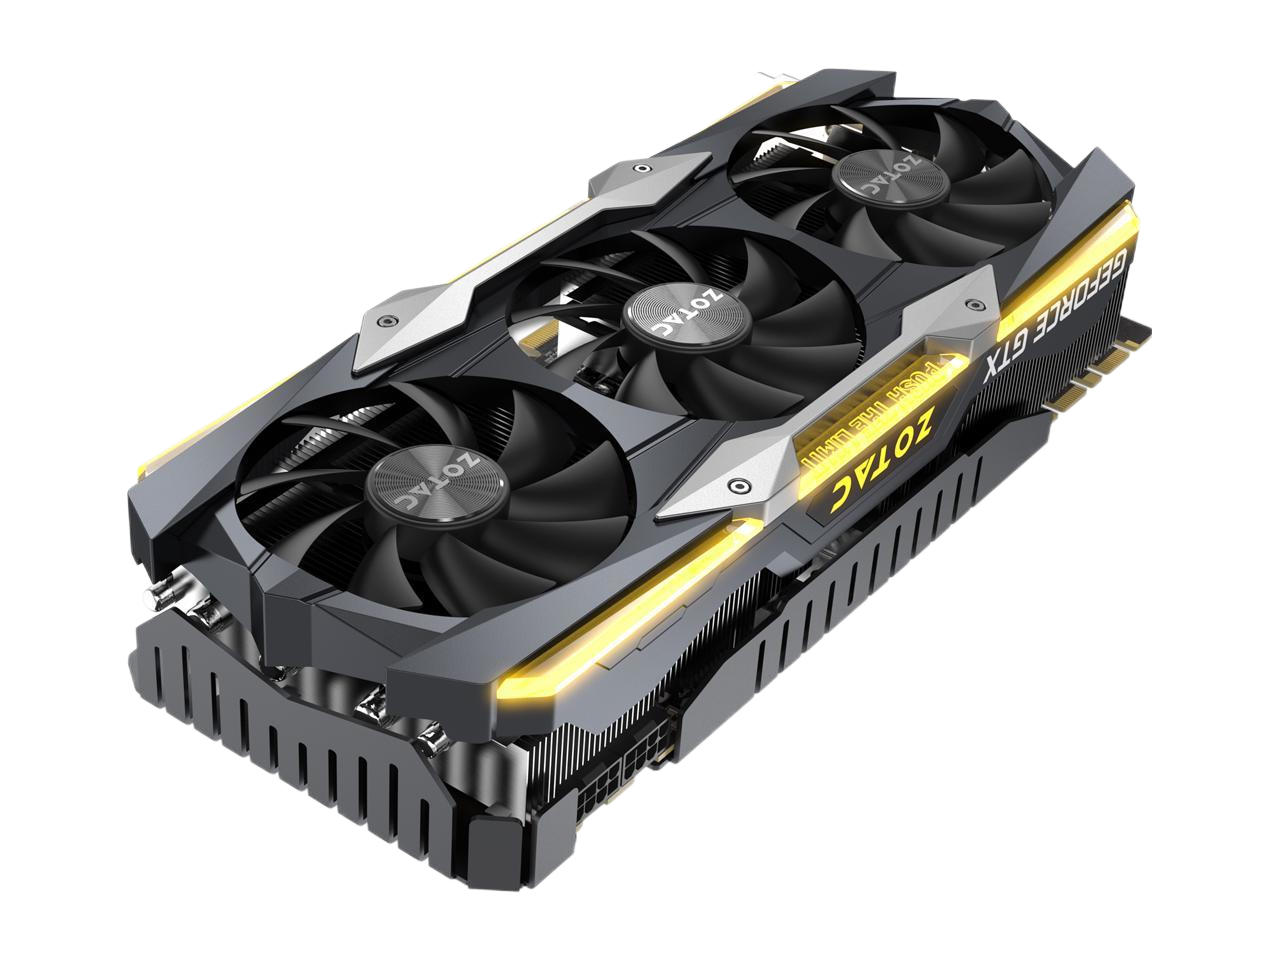 ZOTAC GeForce GTX 1080 Ti AMP Extreme 11GB GDDR5X 352-bit Gaming Graphics Card VR Ready 16+2 Power Phase Freeze Fan Stop IceStorm Cooling Spectra Lighting ZT-P10810C-10P